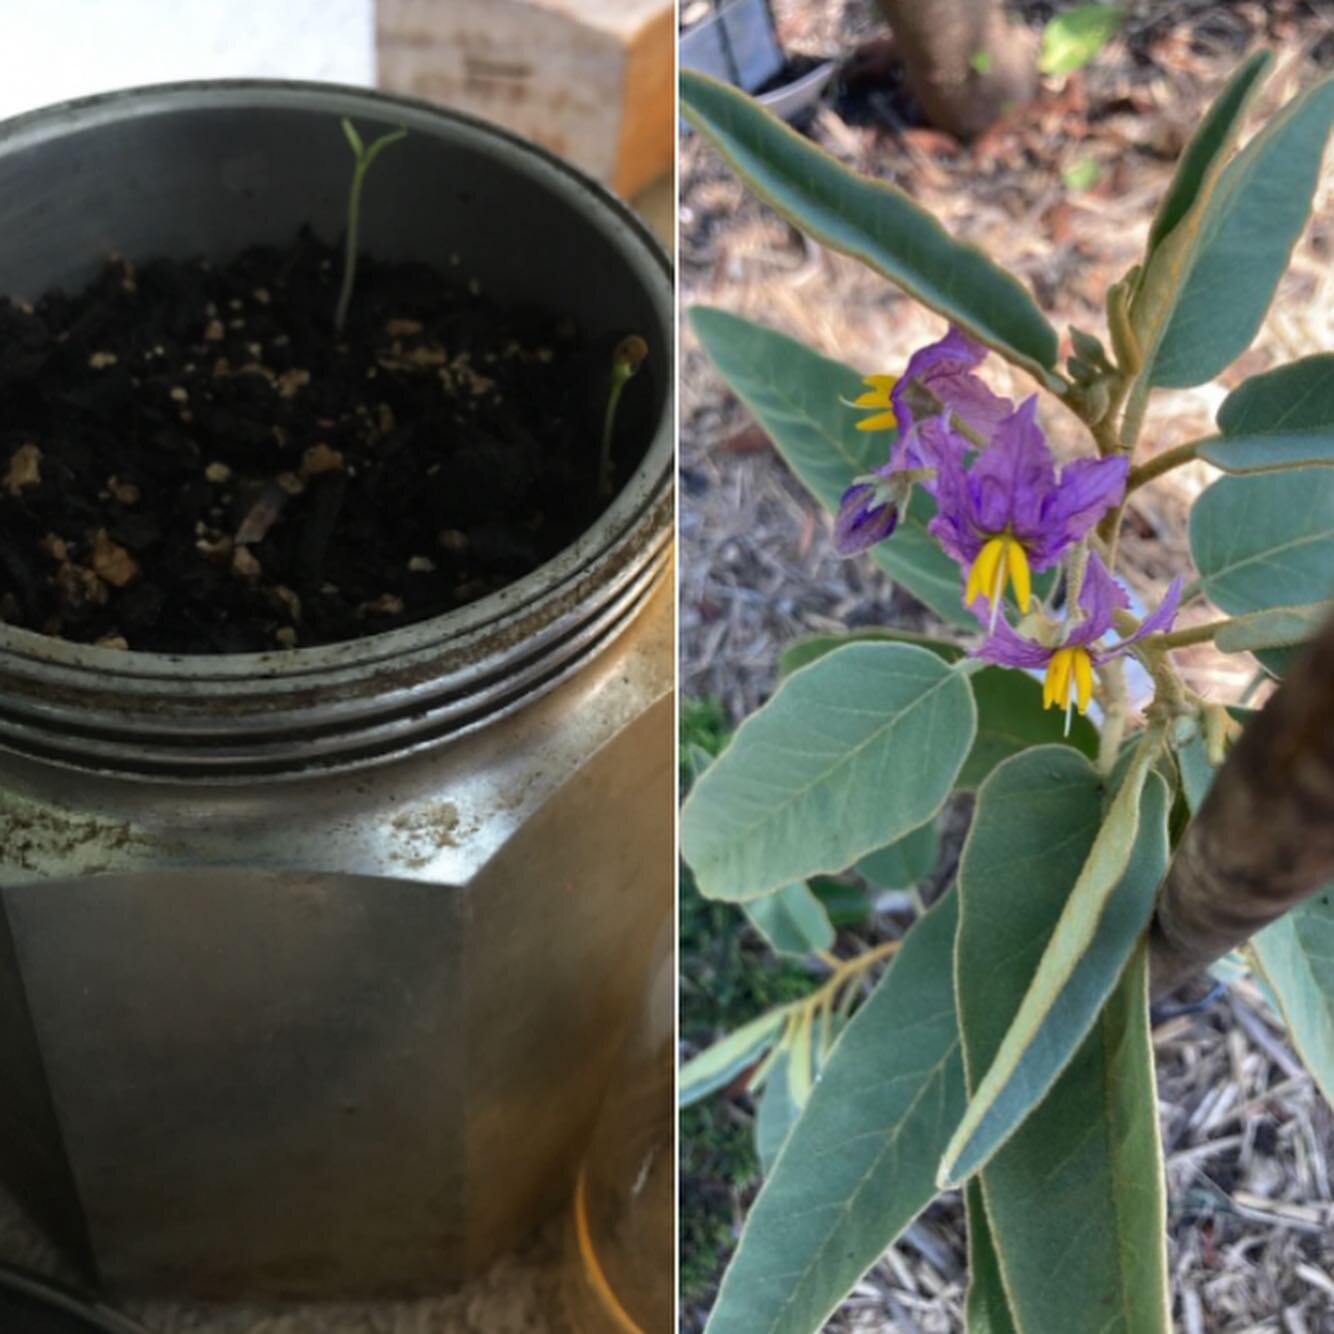 How it started to now, how it is. The Bush Tomato plant (Solanum Centrale) or the Australian Desert raisin is native to the arid parts of Australia. It has a history of being used as a food source by First Nations people who dry the fruit of the bush